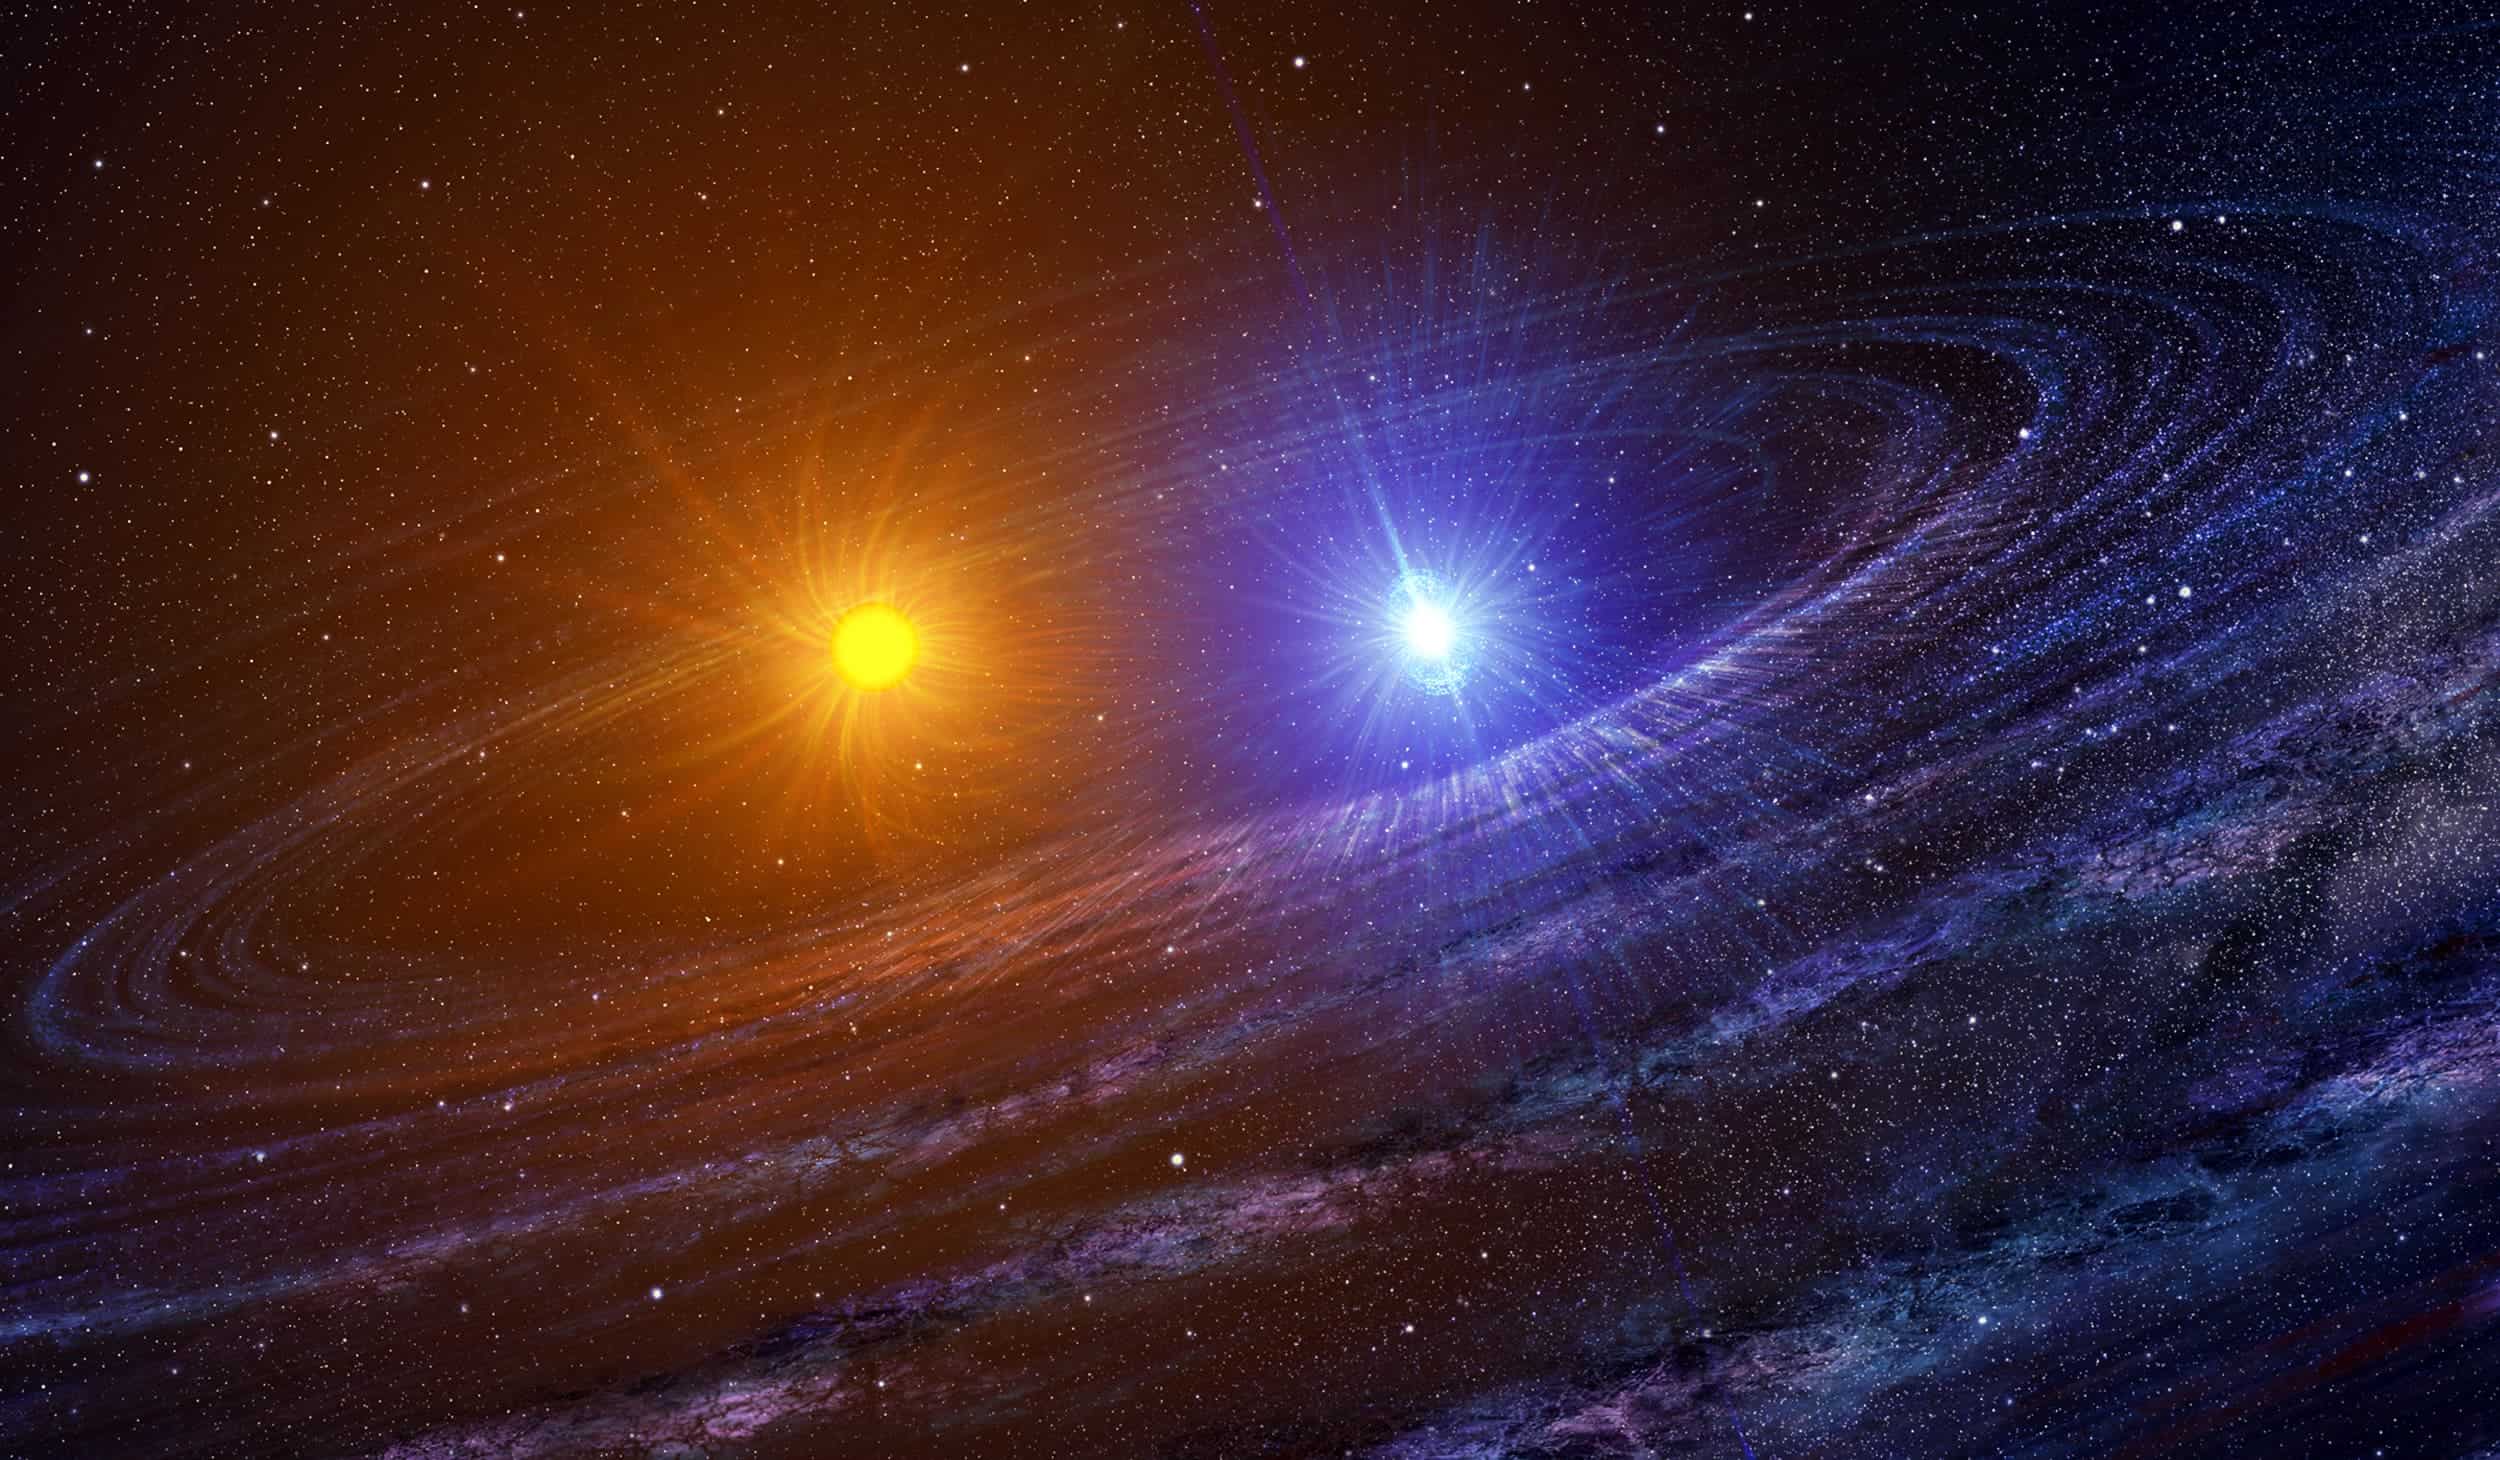 Artist impression of young binary system. Credit: NASA.